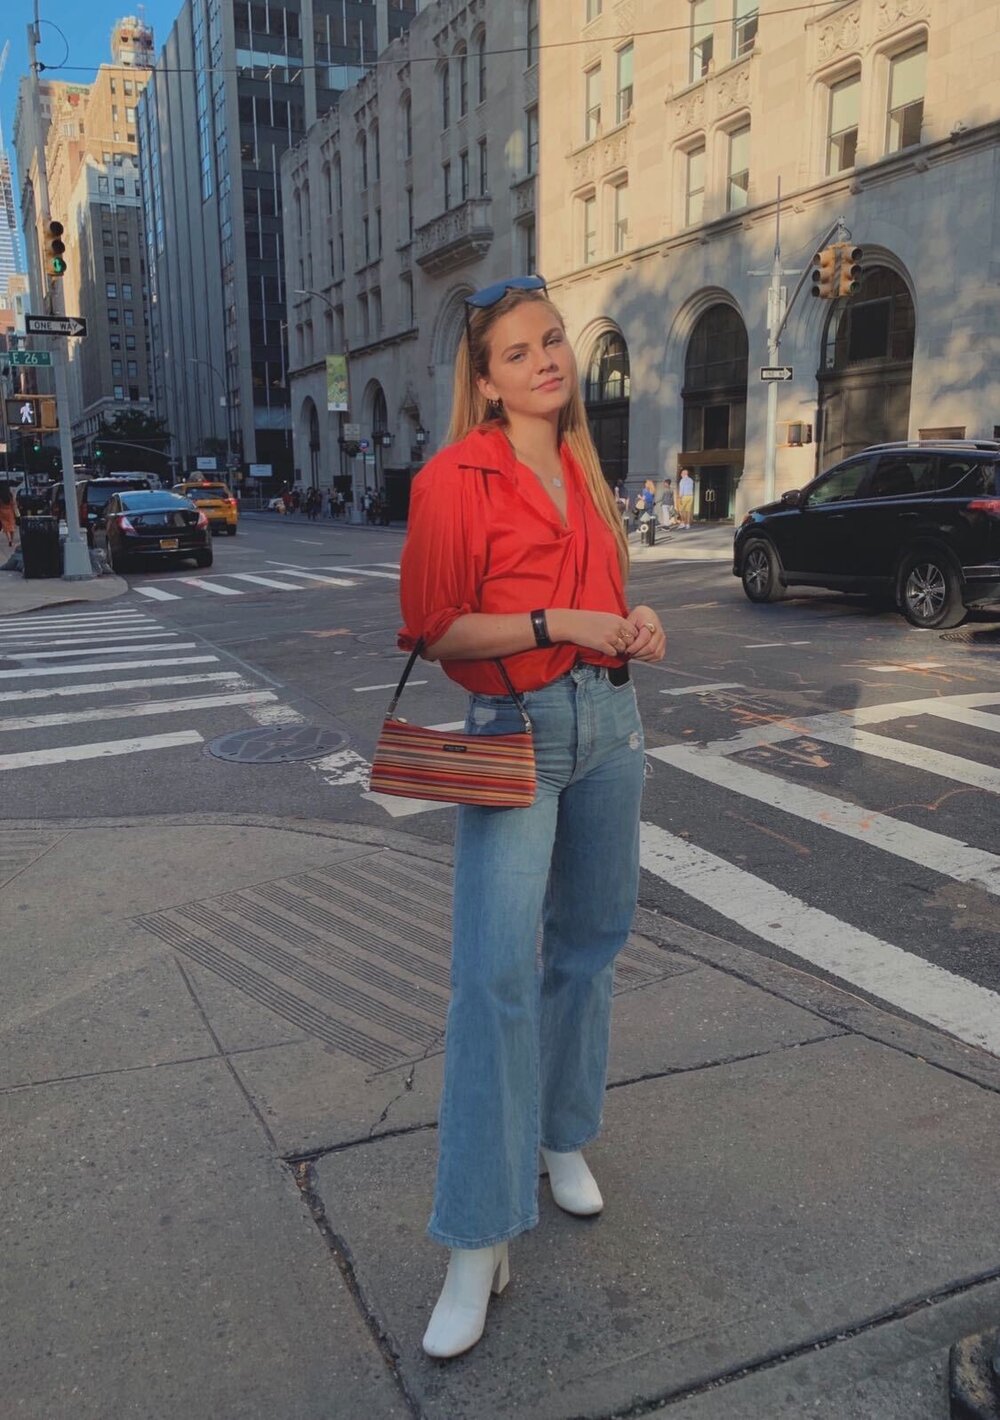 Within my first month of attending FIT, I got an internship in New York City and scheduled my classes so that I could work two 9-5 days per week. @_mollyymoore